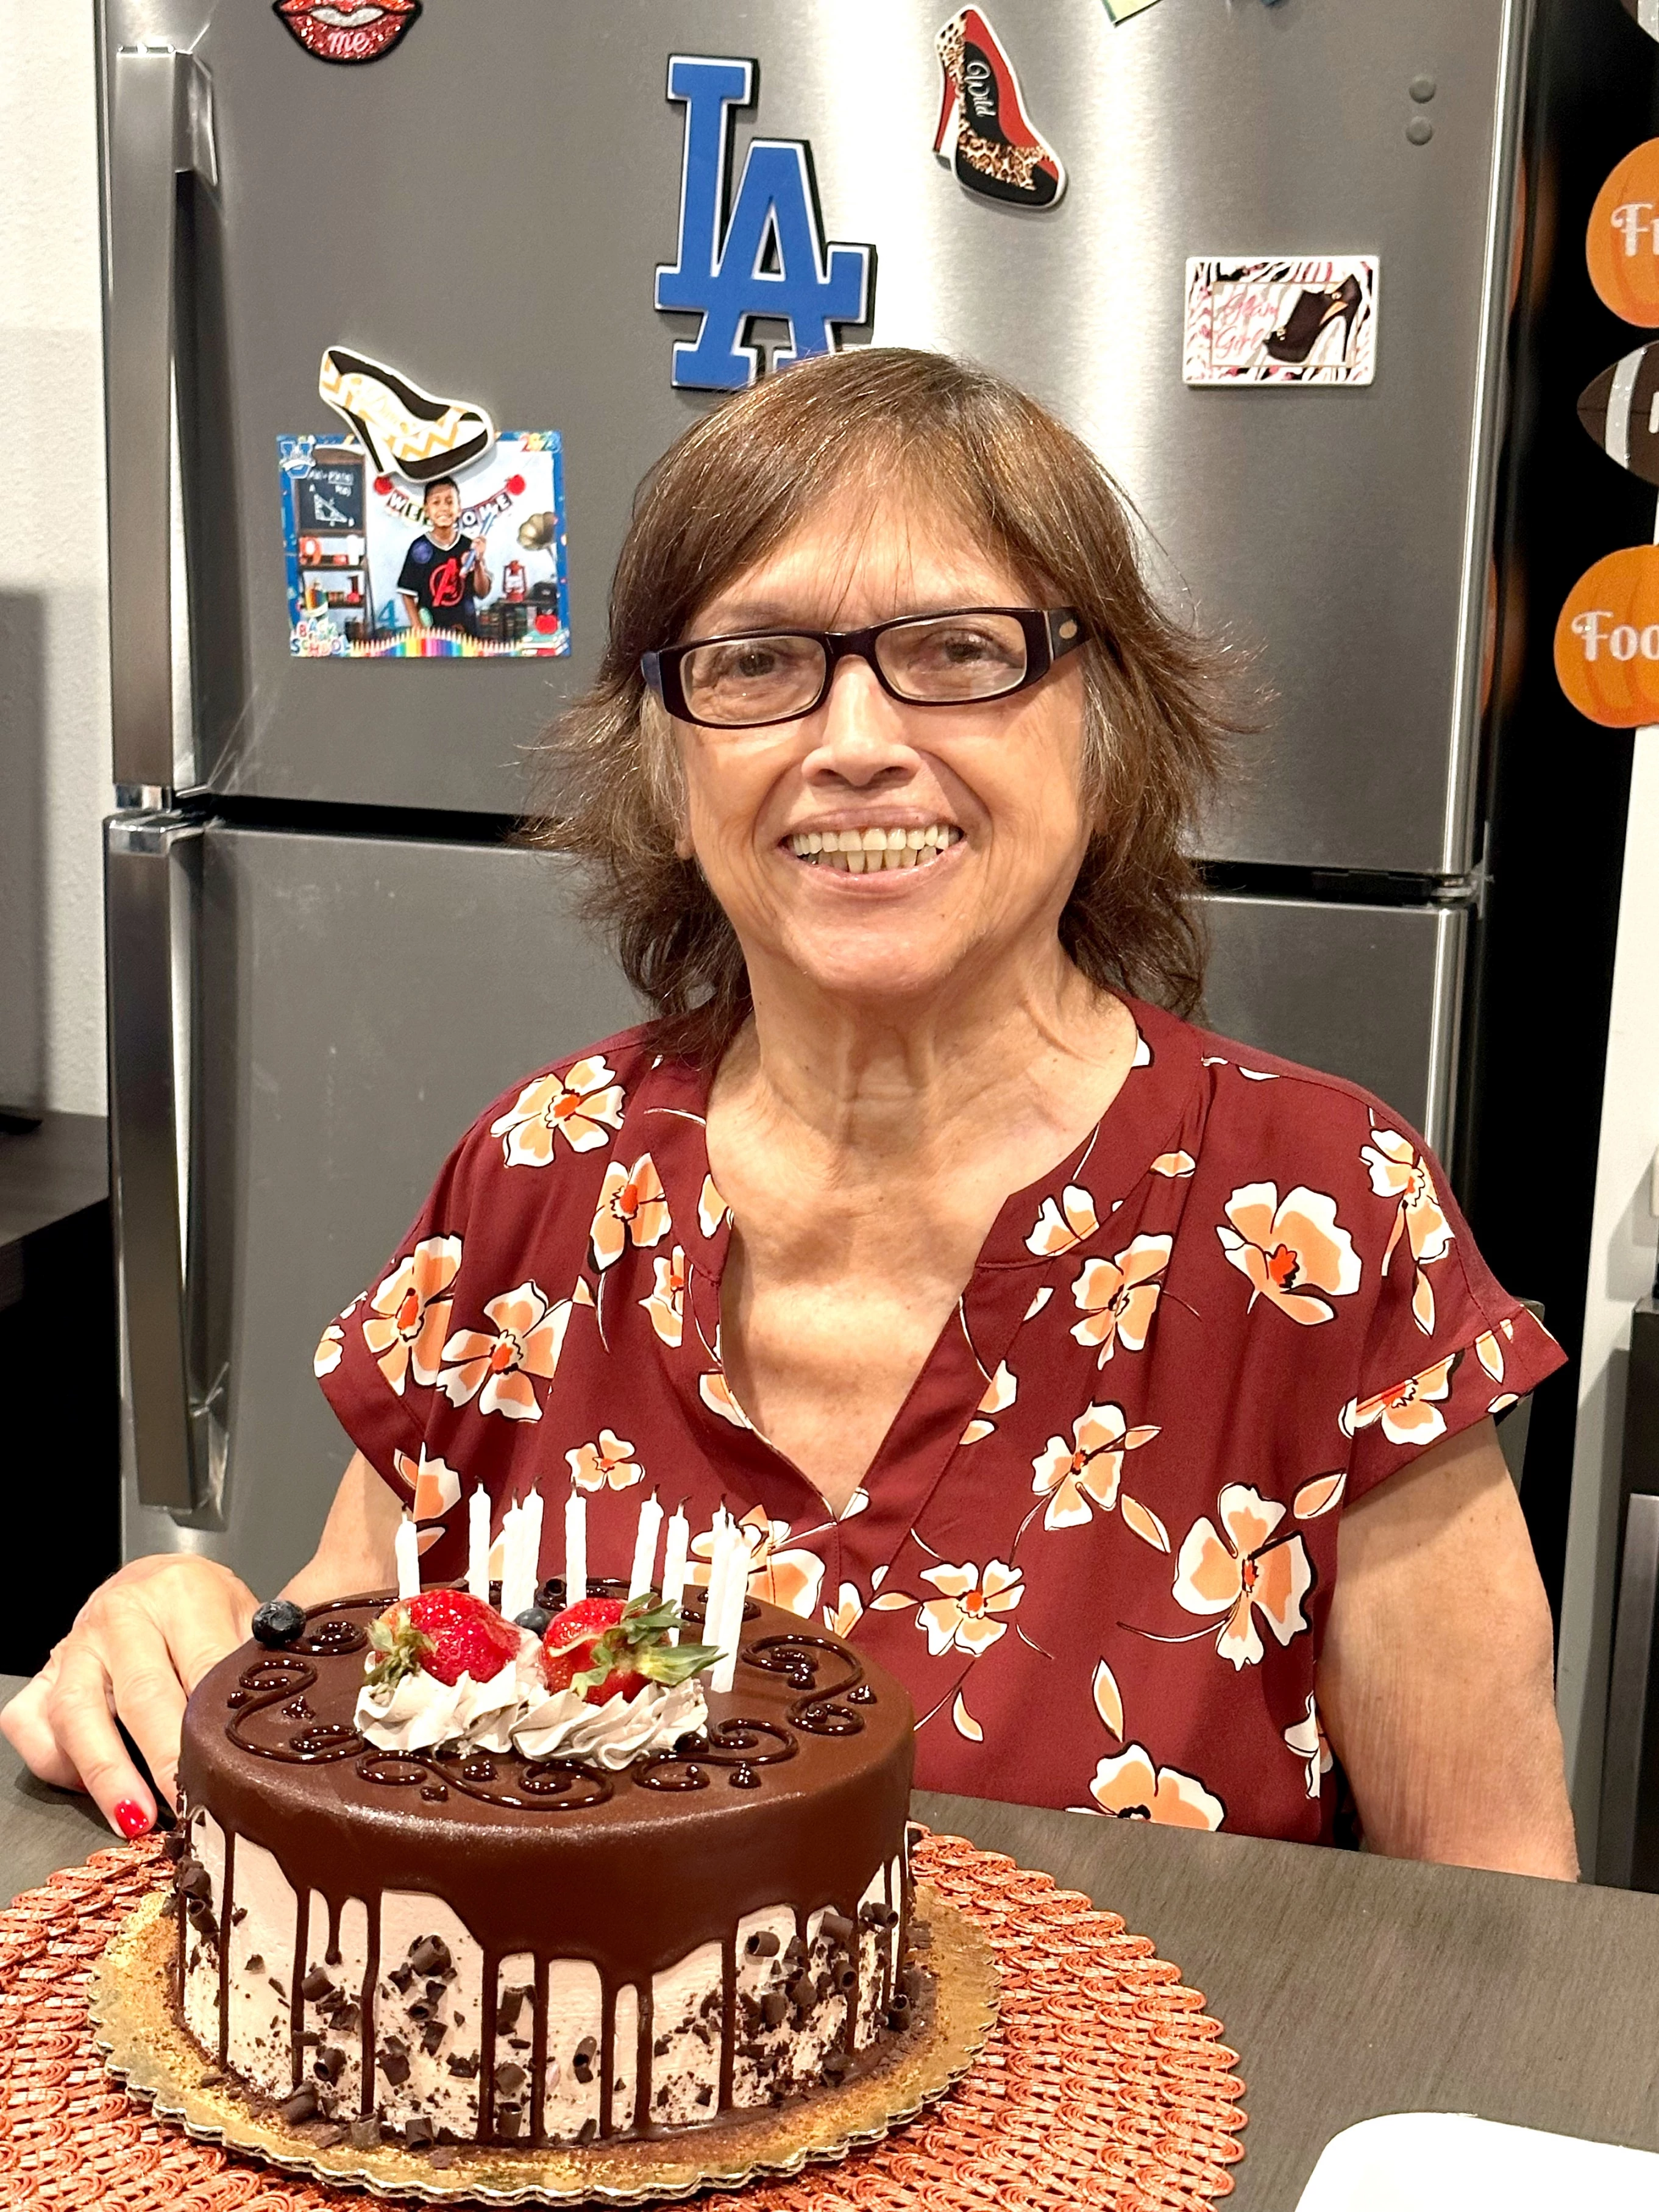 We celebrated one of our faves with her favorite cake. Happy Birthday. 78 never looked so good!